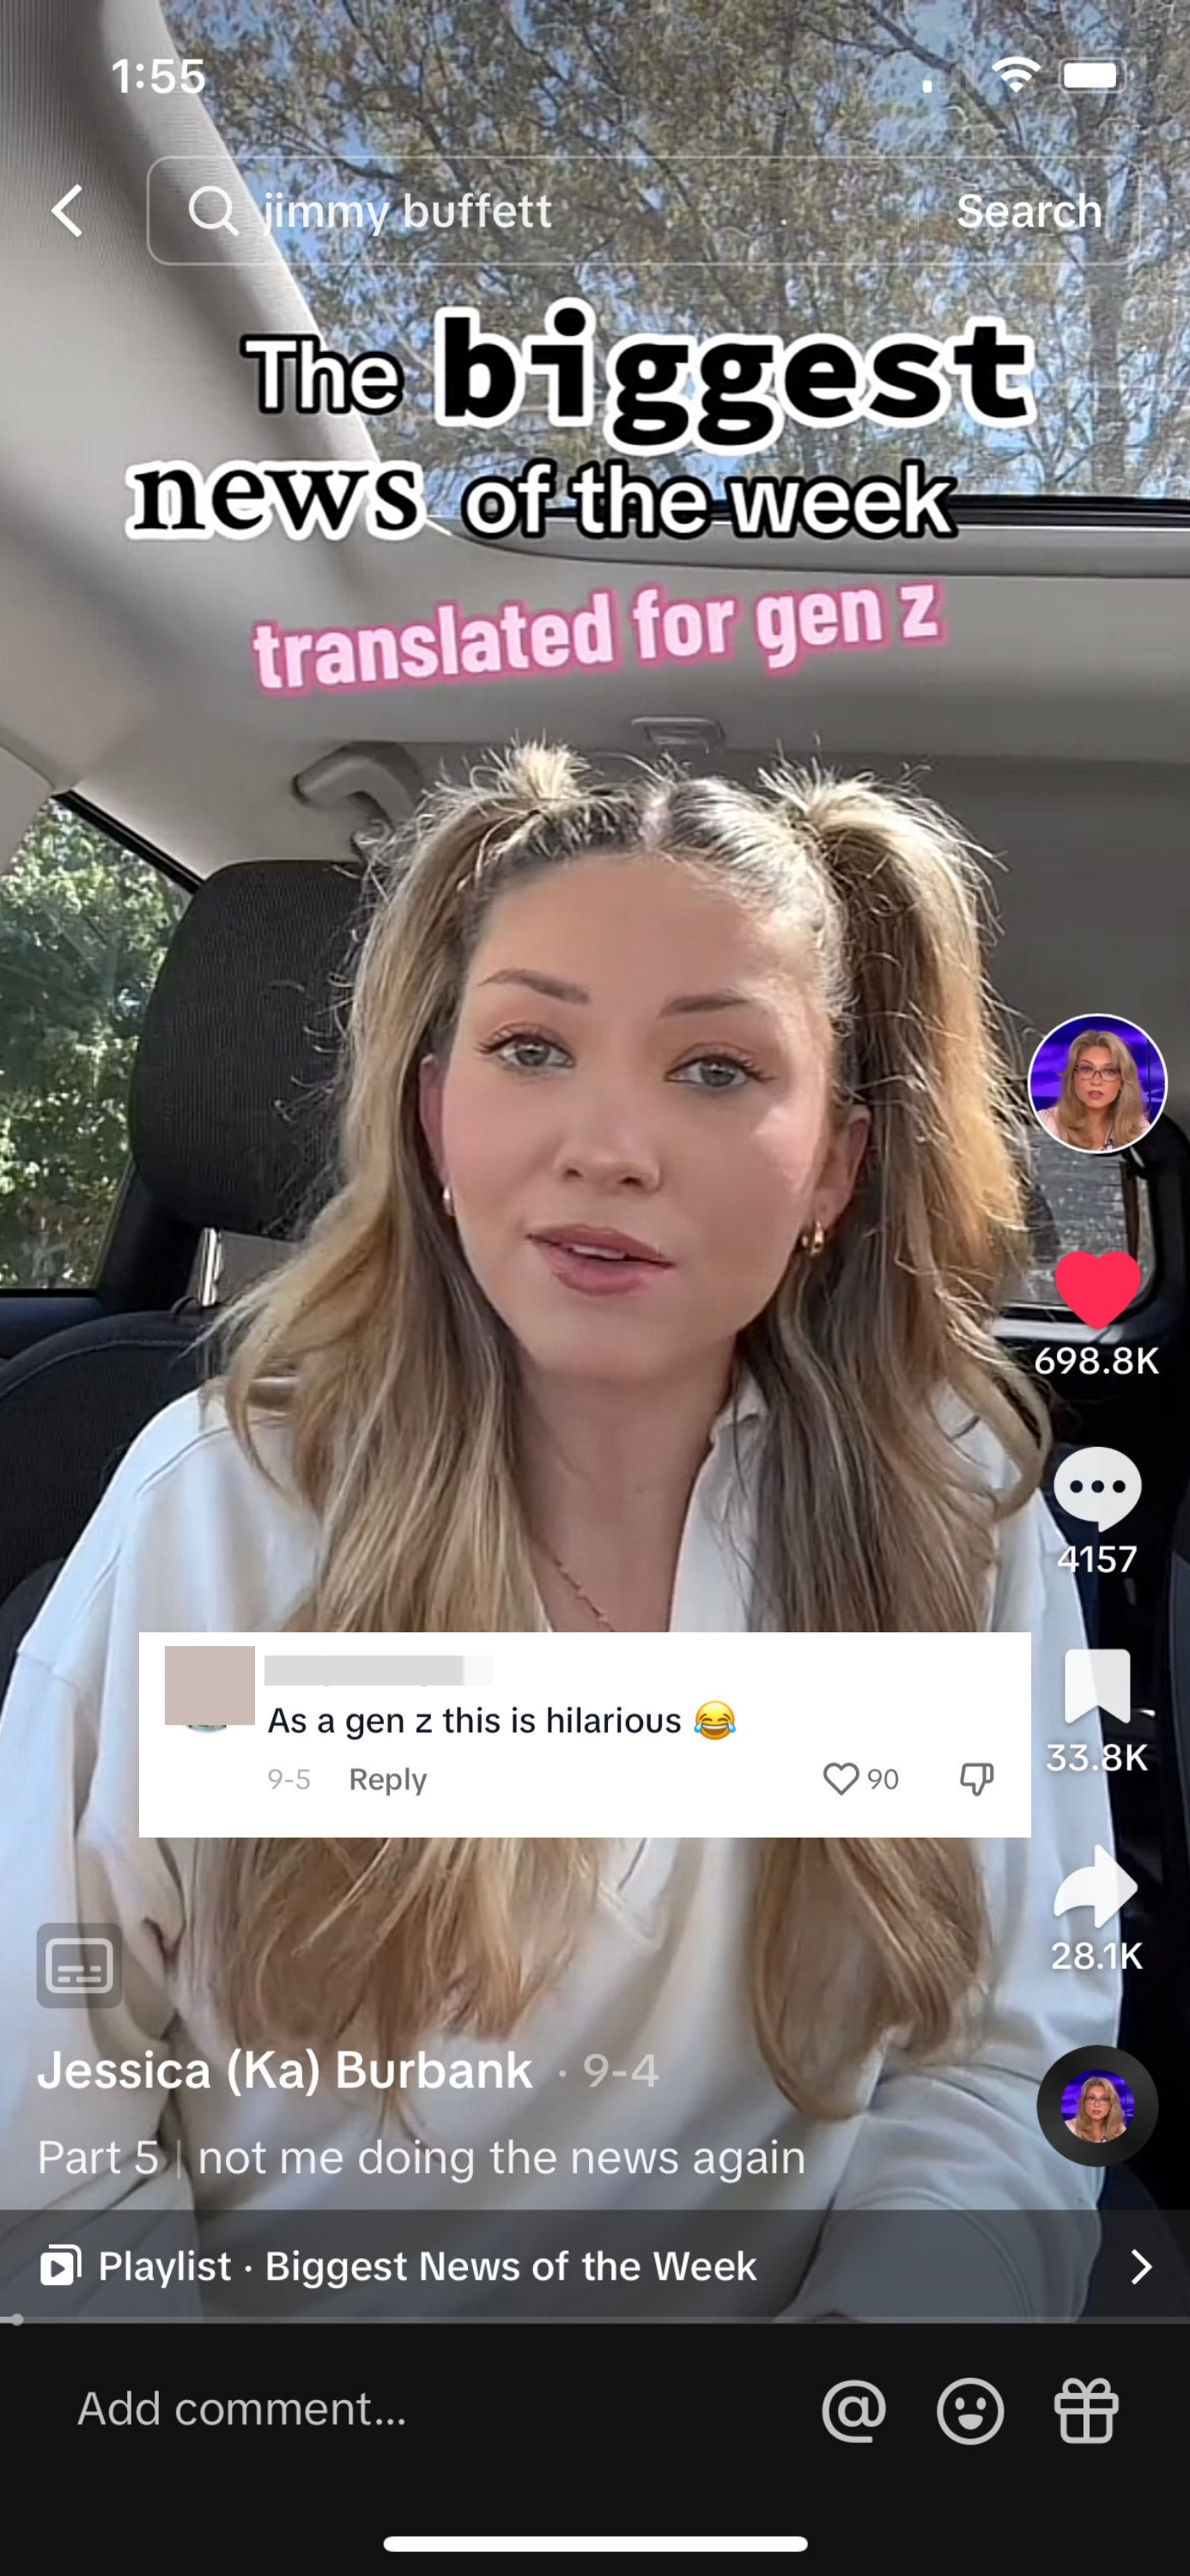 Jessica reading the news in her car with a comment that says &quot;As a gen z this is hilarious&quot;